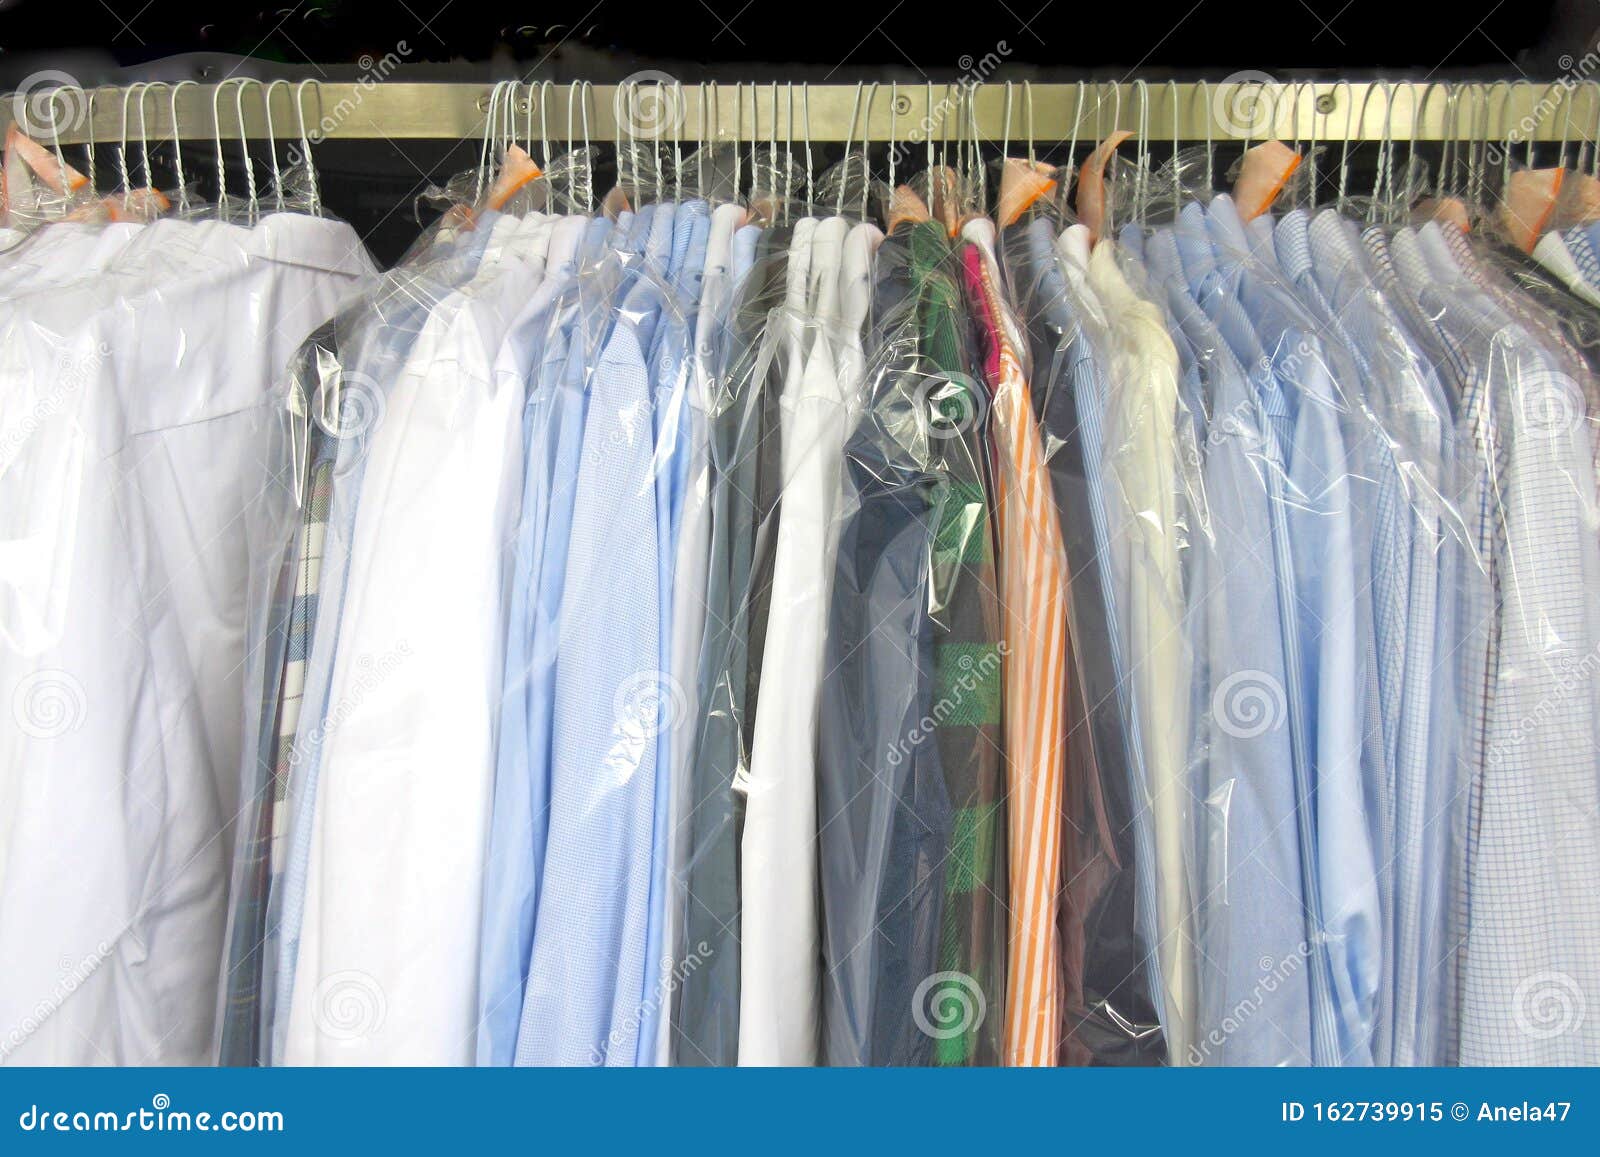 https://thumbs.dreamstime.com/z/freshly-cleaned-men-s-shirts-ladies-blouses-dry-cleaning-hung-hangers-protected-plastic-film-ready-pick-up-162739915.jpg